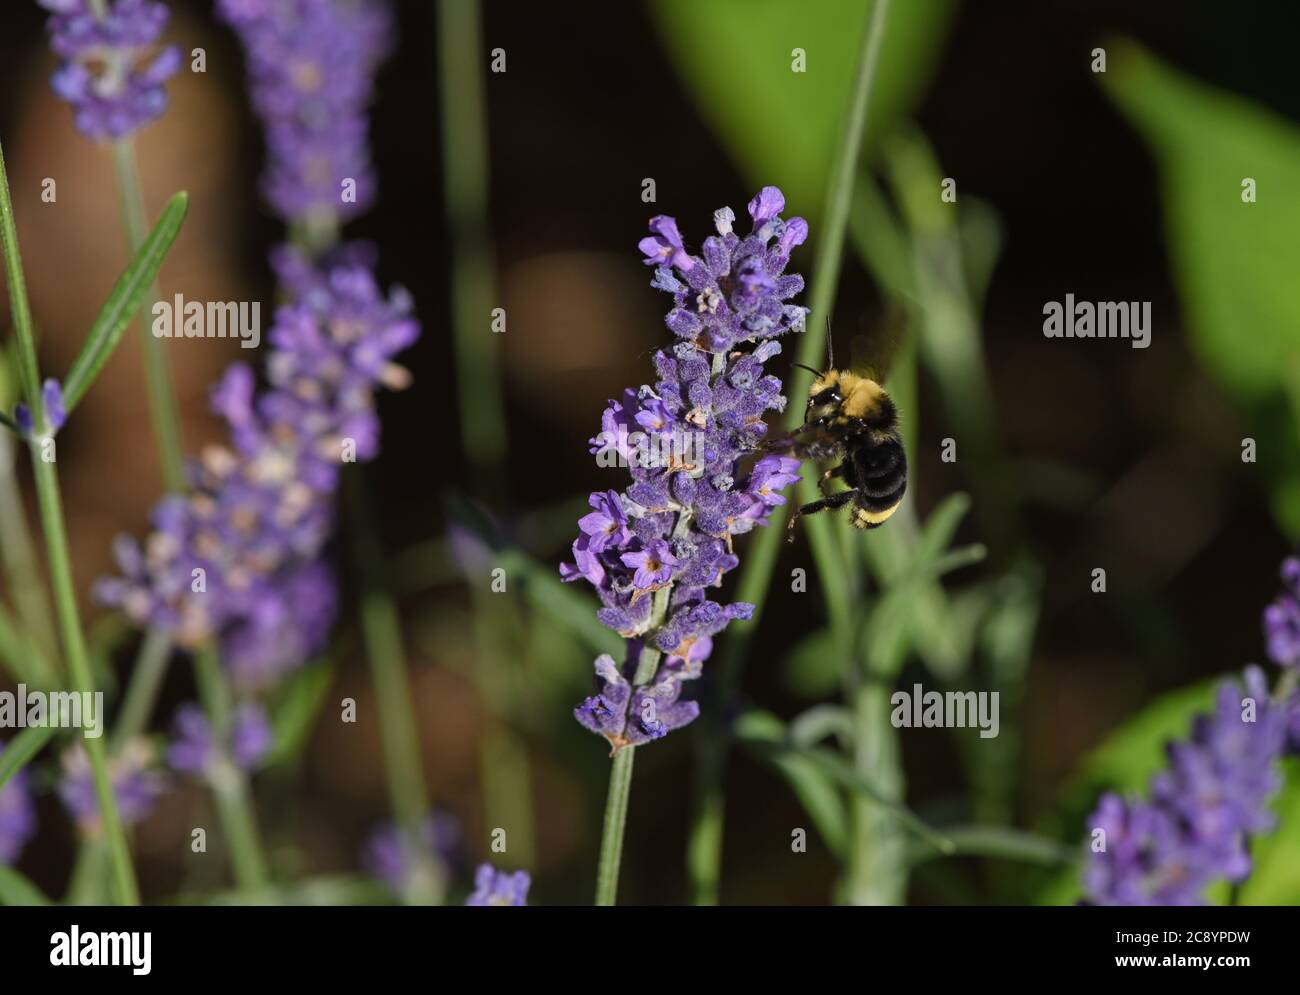 A bumble bee lands on a lavender flower bloom on a summer day in Victoria, British Columbia Canada on Vancouver island. Stock Photo